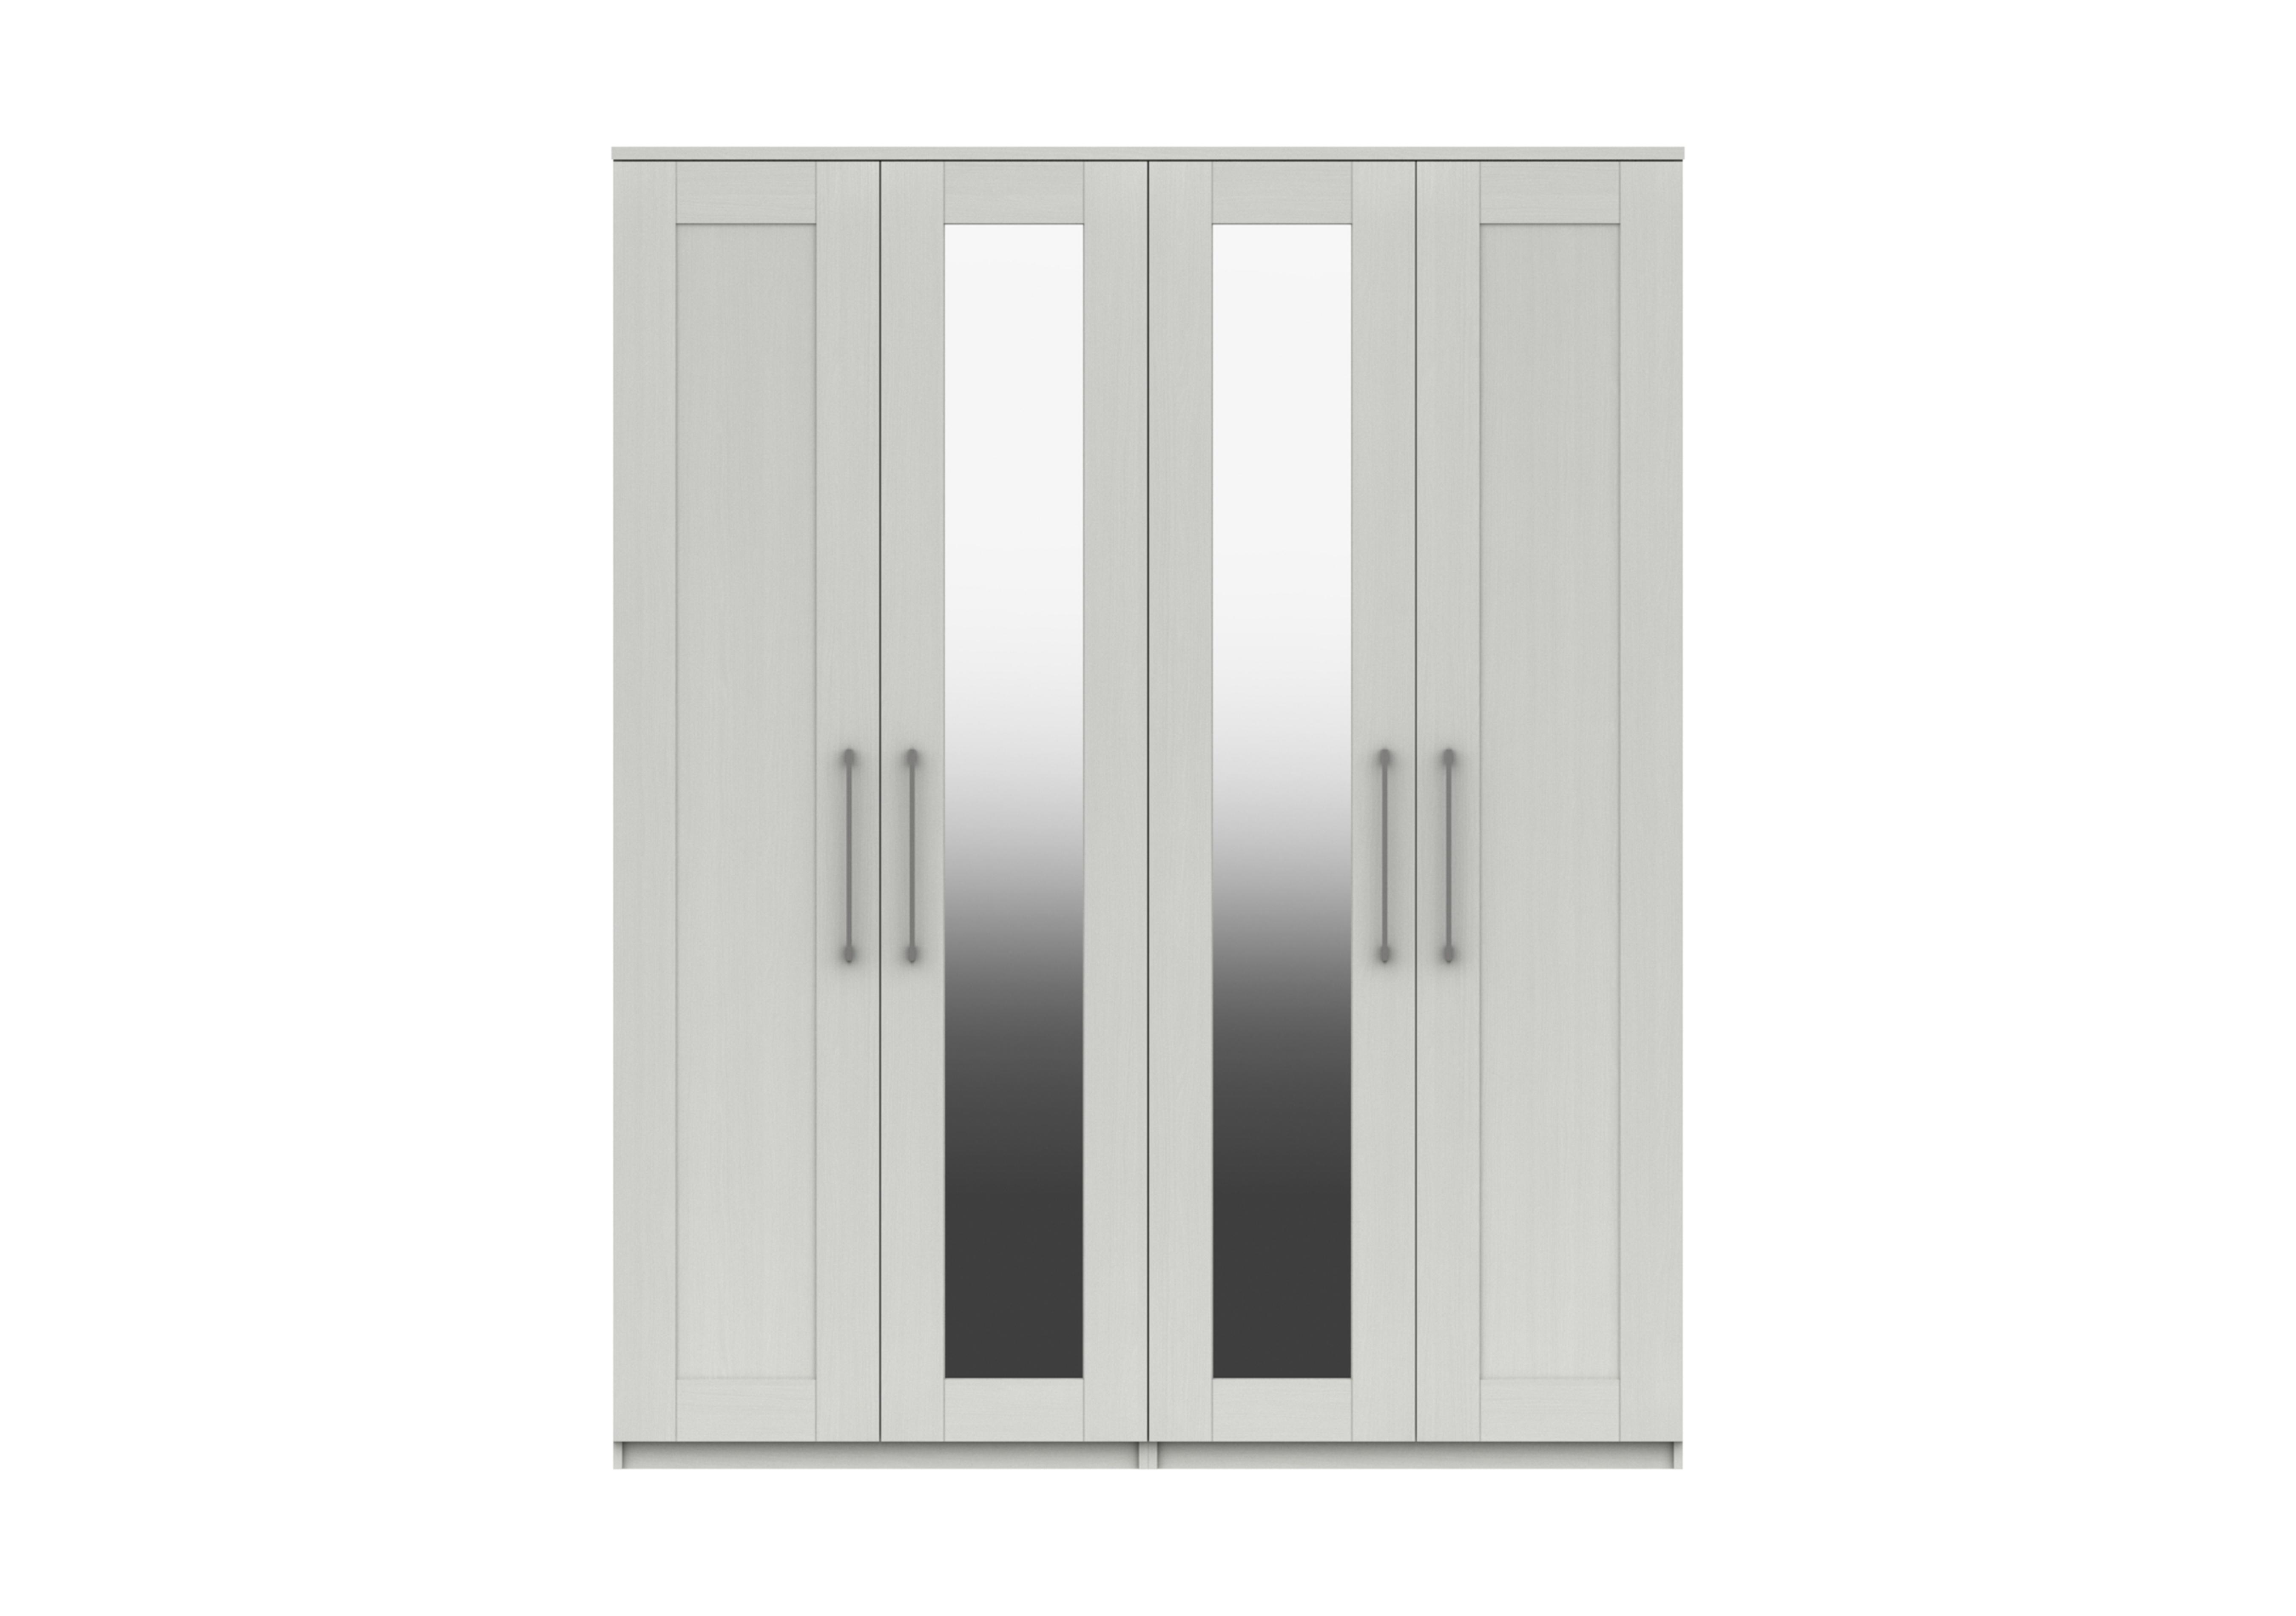 Fenchurch 4 Door Tall Wardrobe with Mirrors in White on Furniture Village